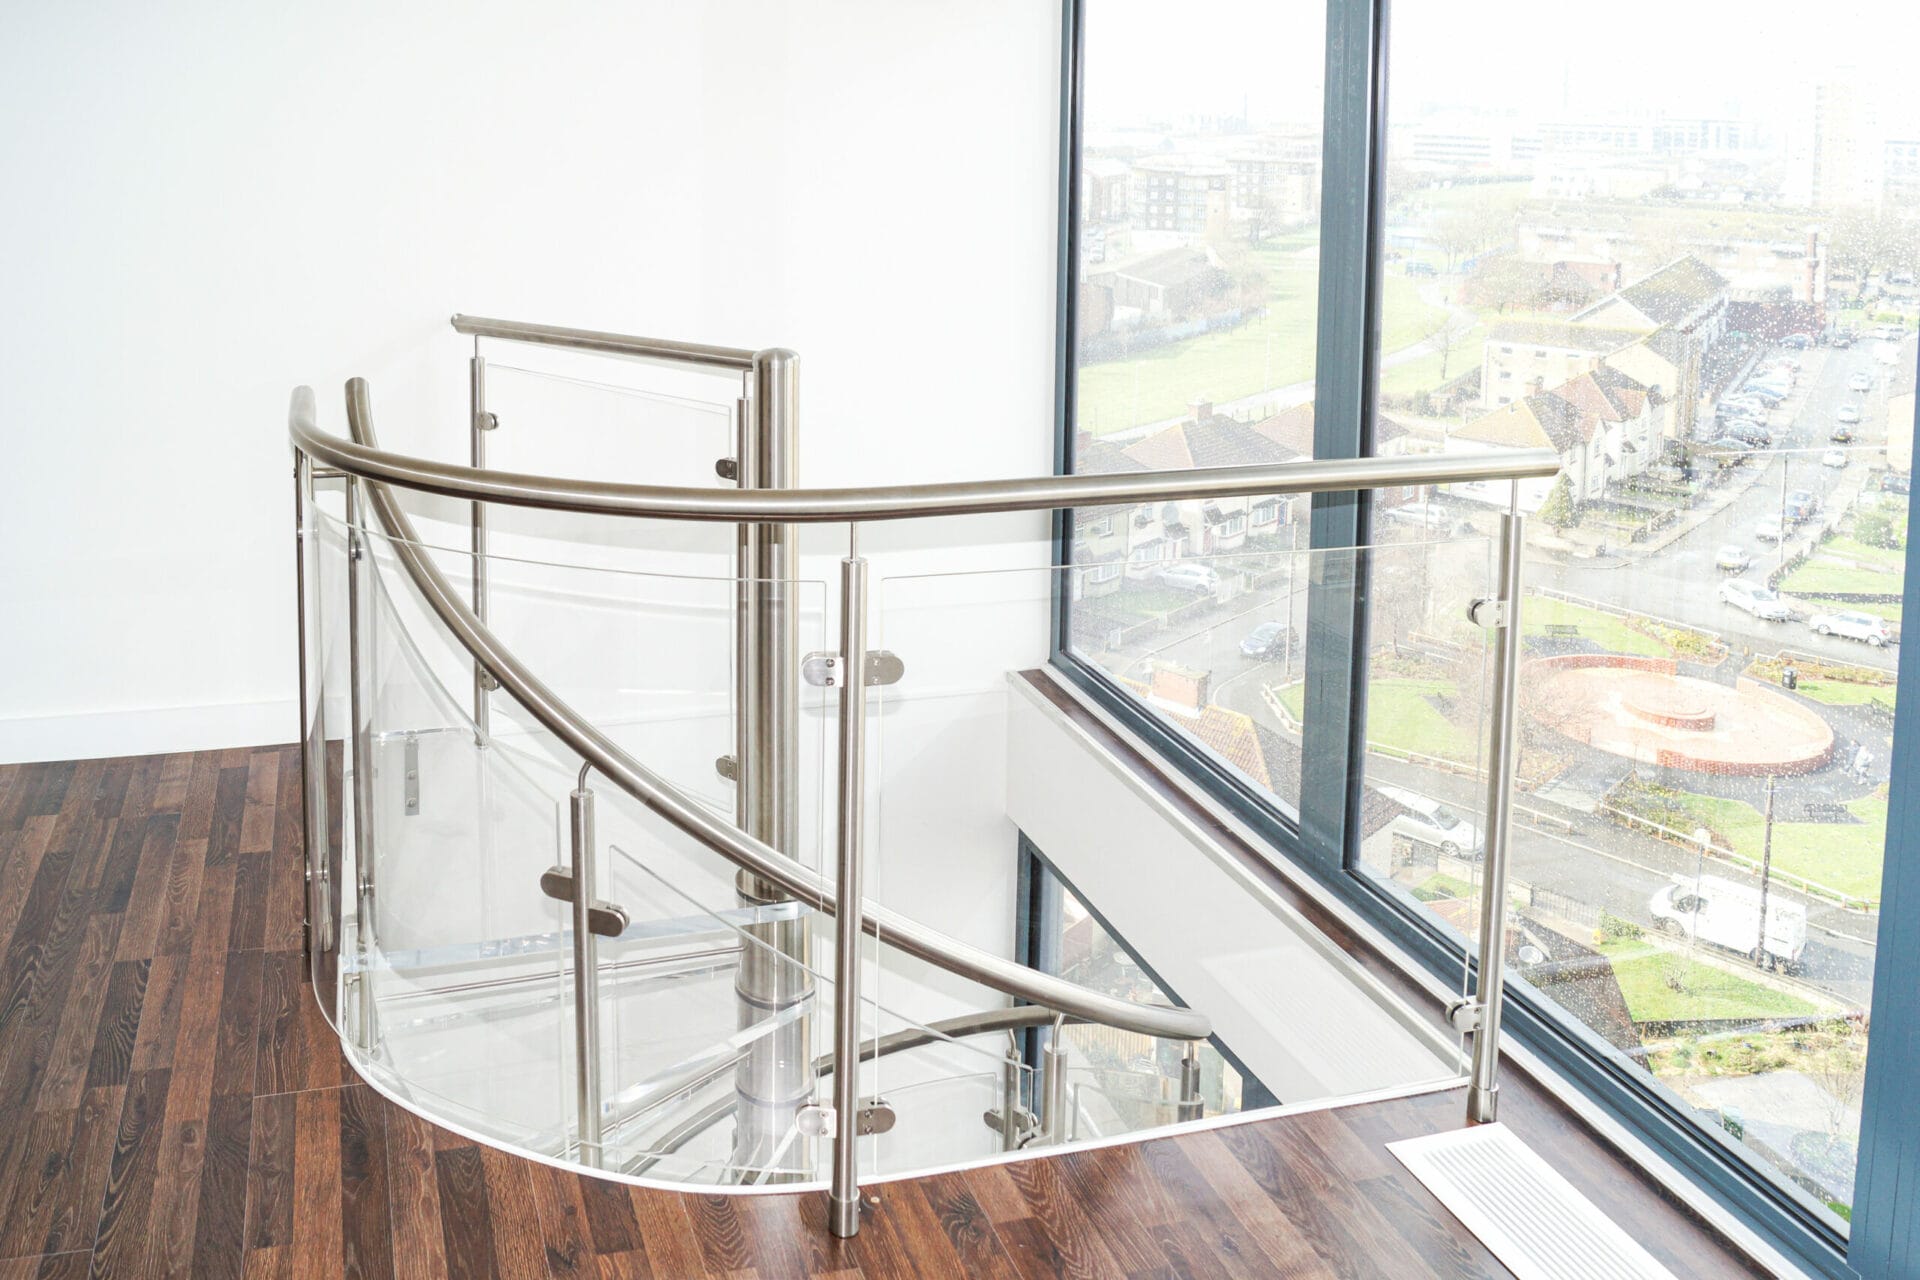 Penthouse spiral staircase glass treads